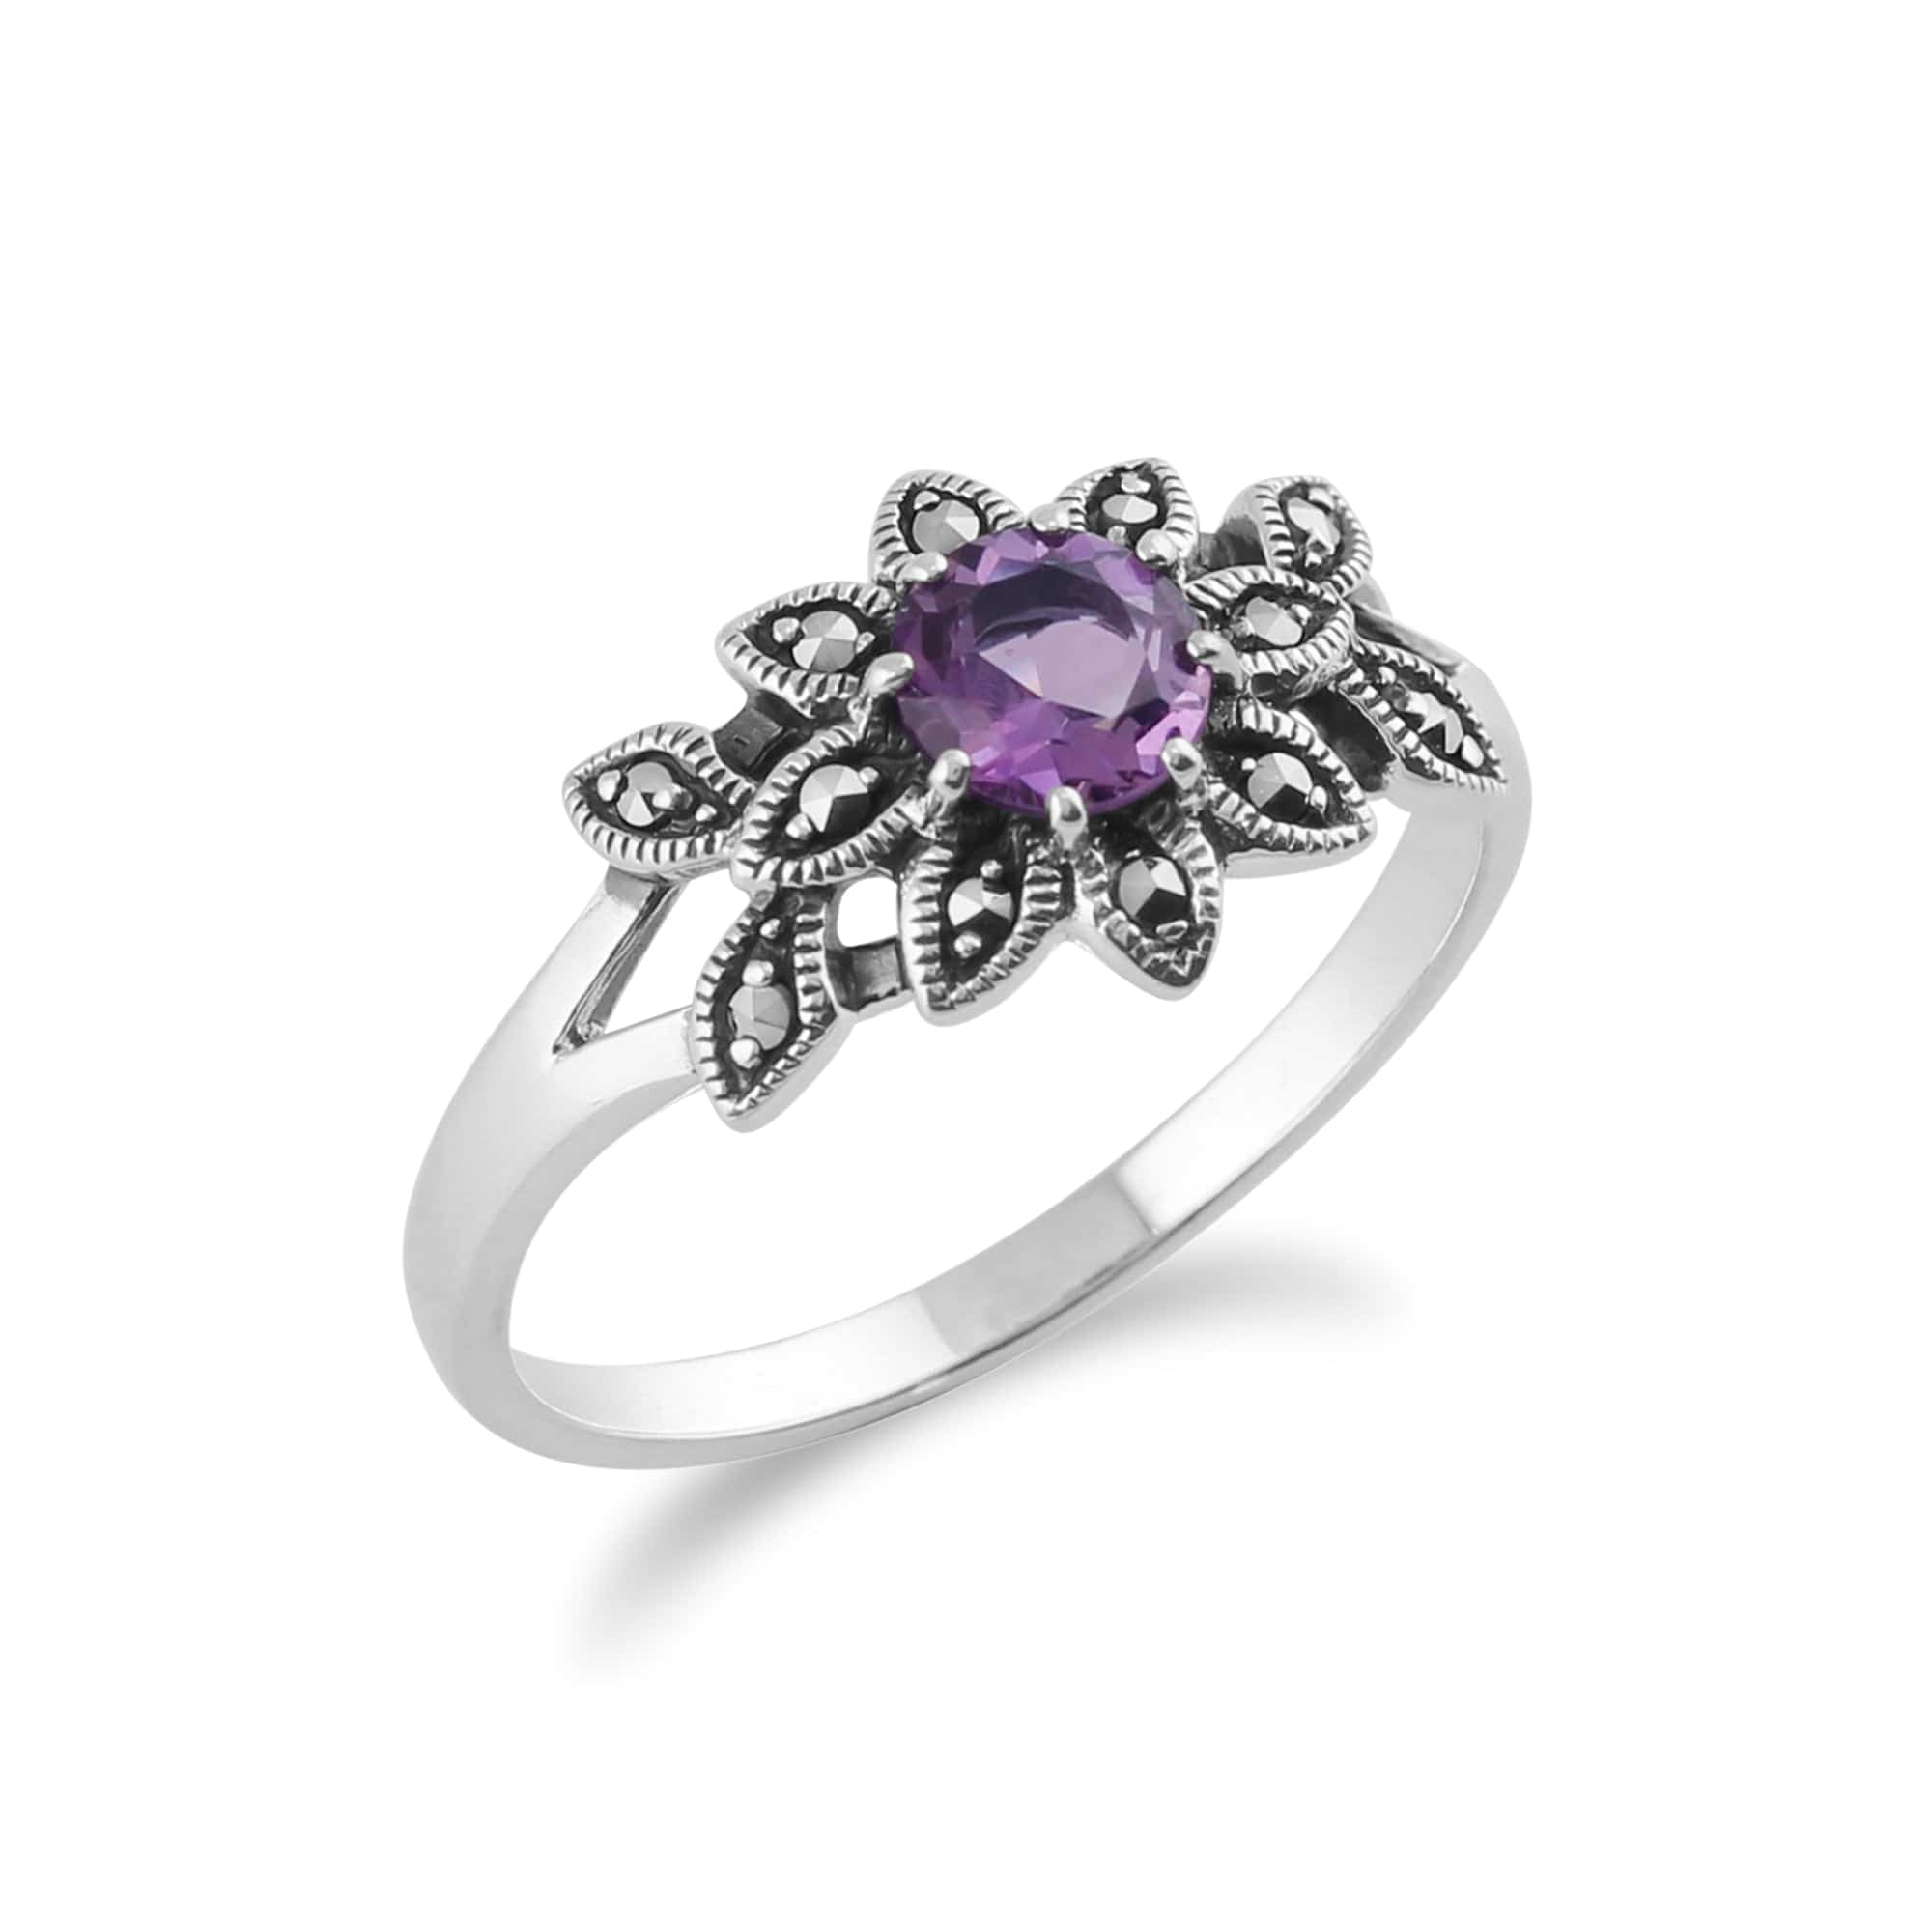 Art Nouveau Style Round Amethyst & Marcasite Floral Ring in 925 Sterling Silver - Gemondo